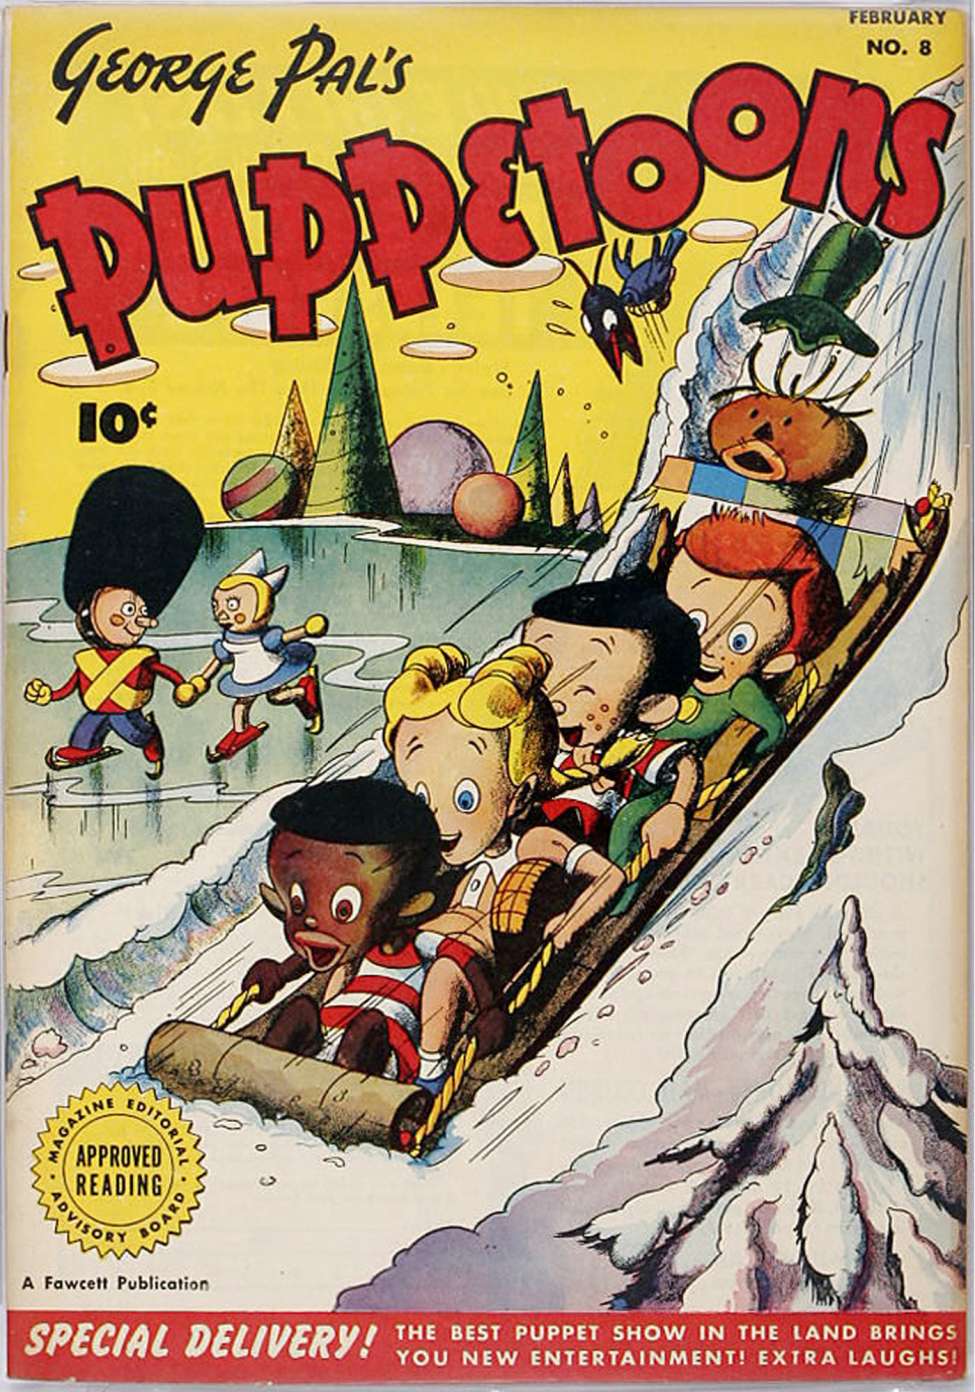 Comic Book Cover For George Pal's Puppetoons 8